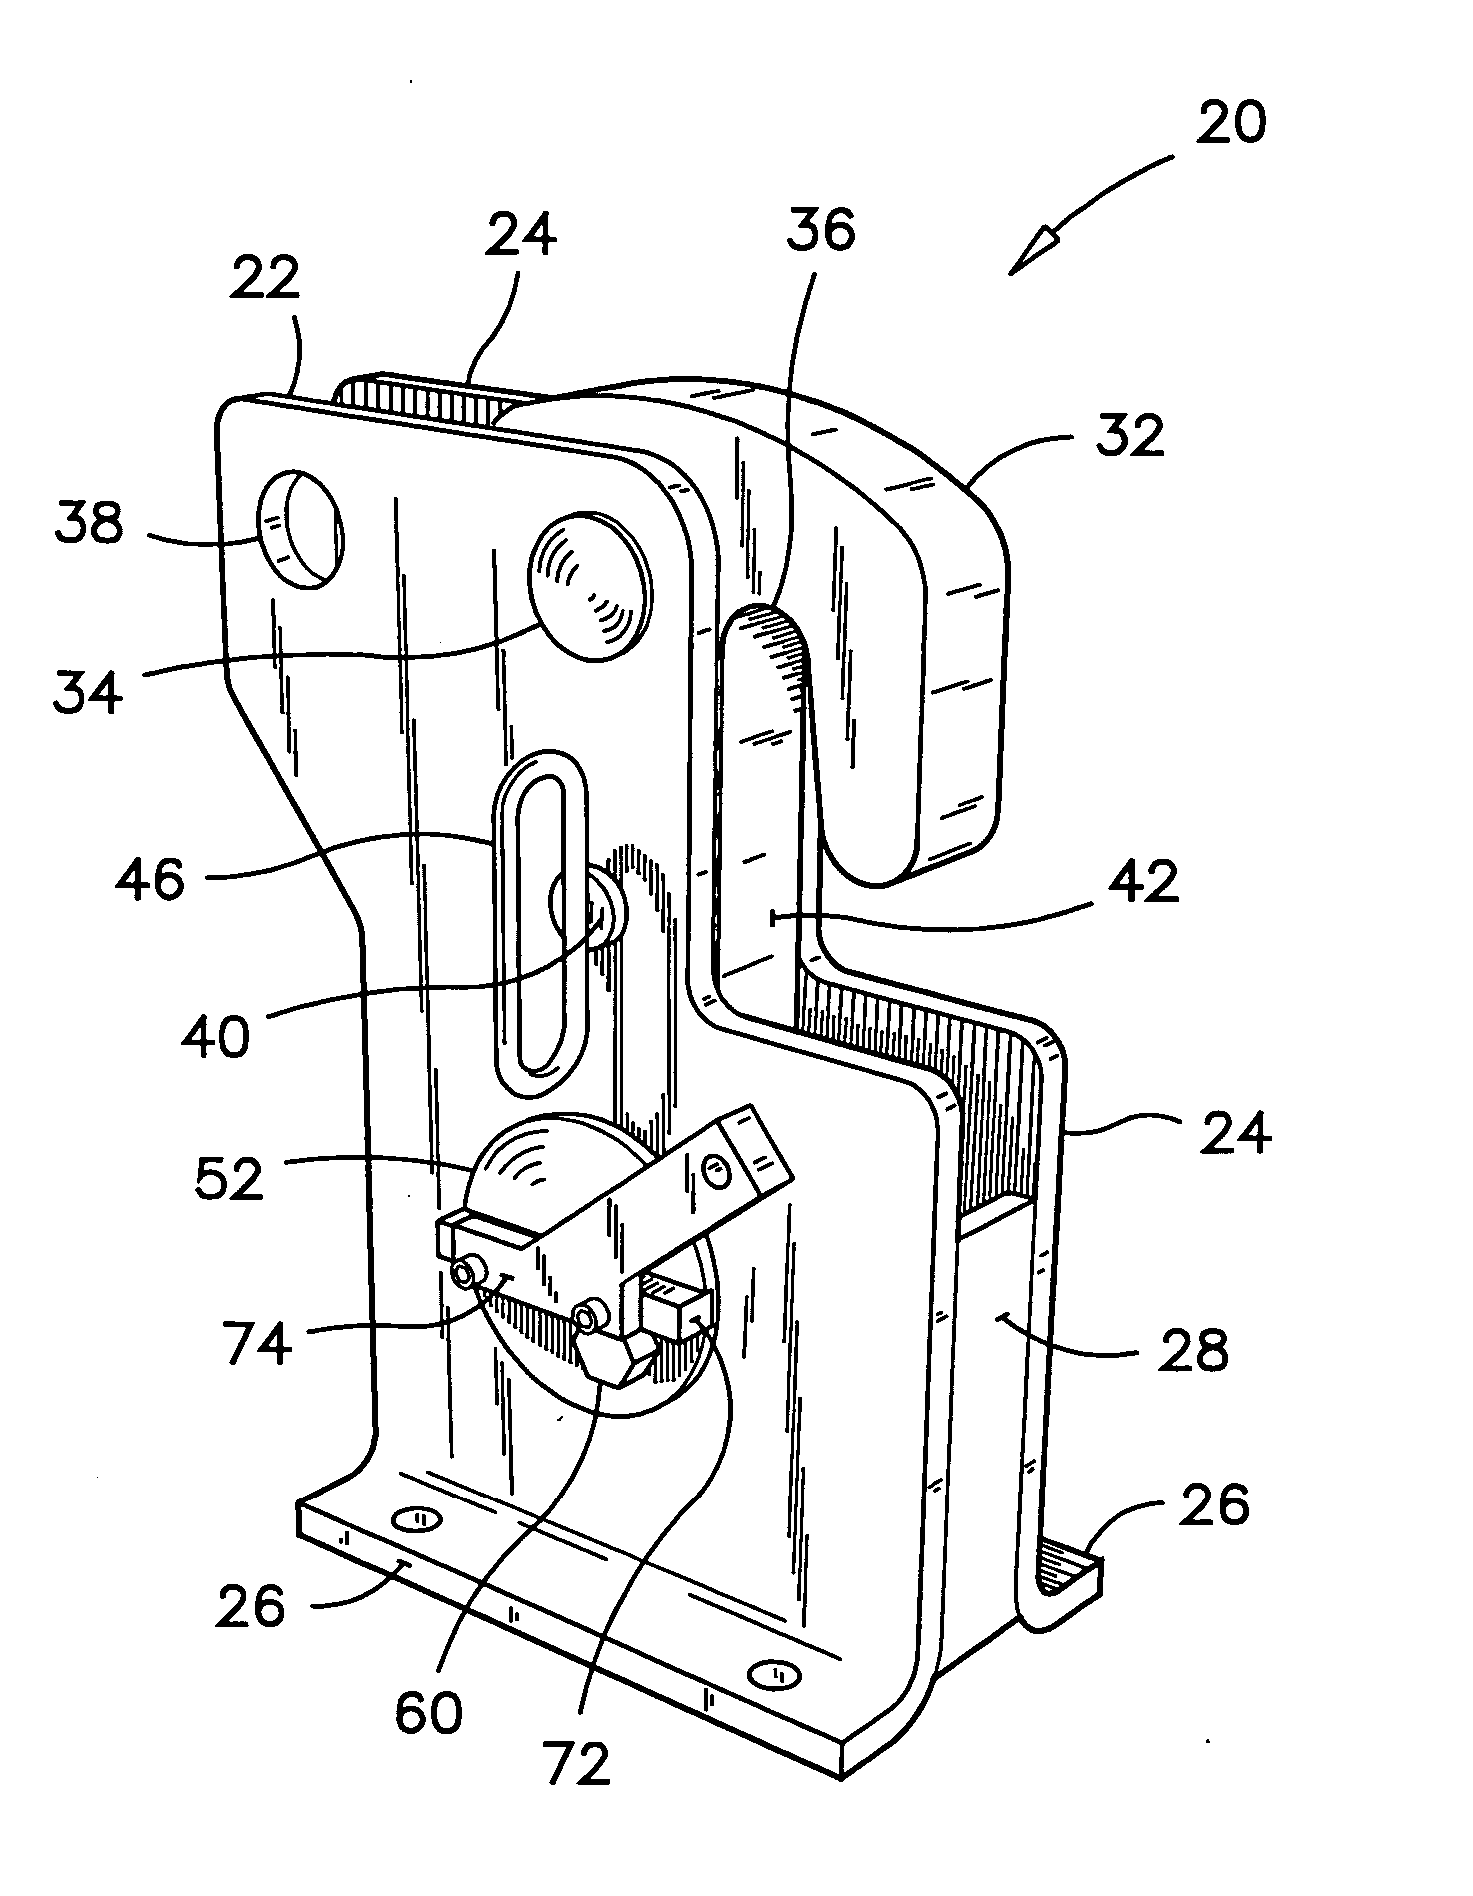 Lifeboat release mechanism